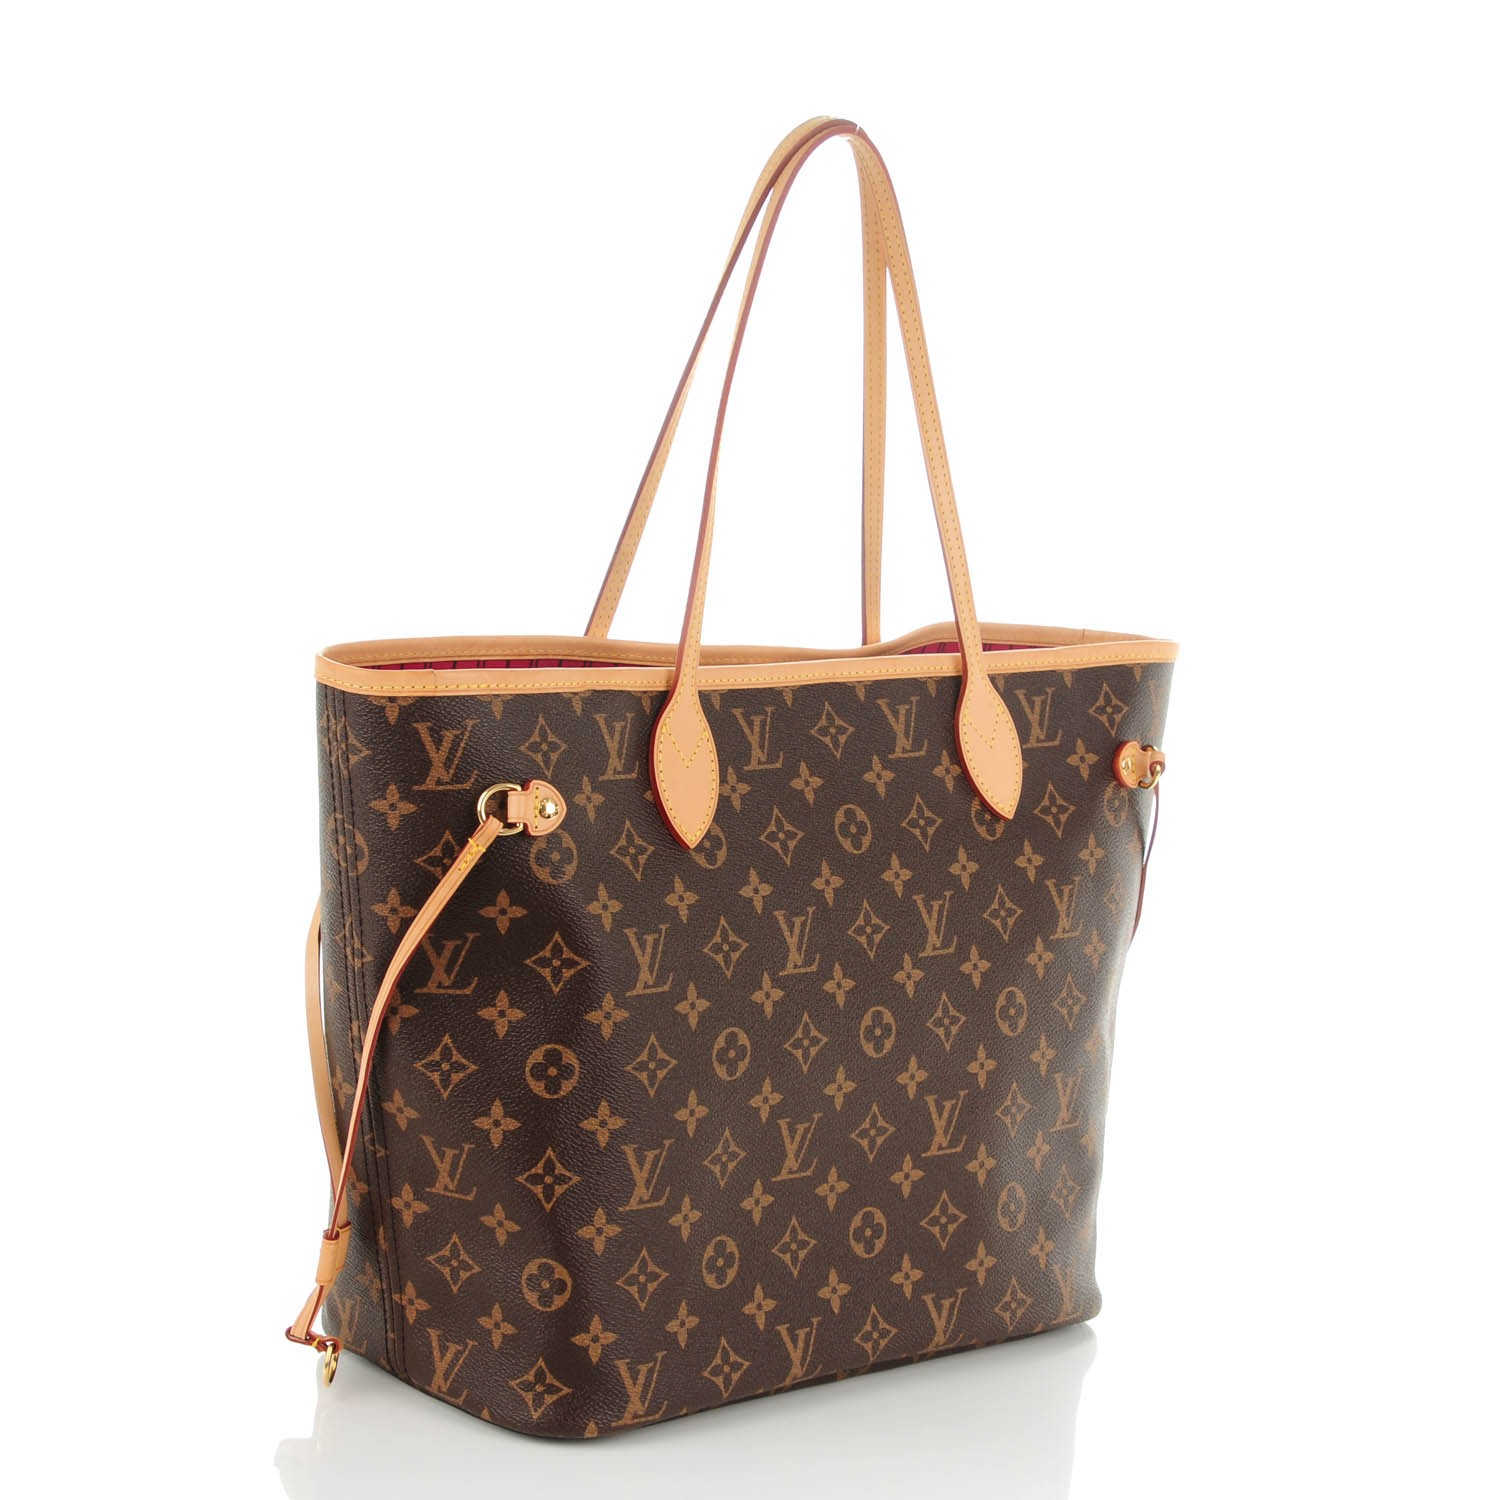 HBD Mr. Louis Vuitton: 15 insane LV knock-offs you have to check